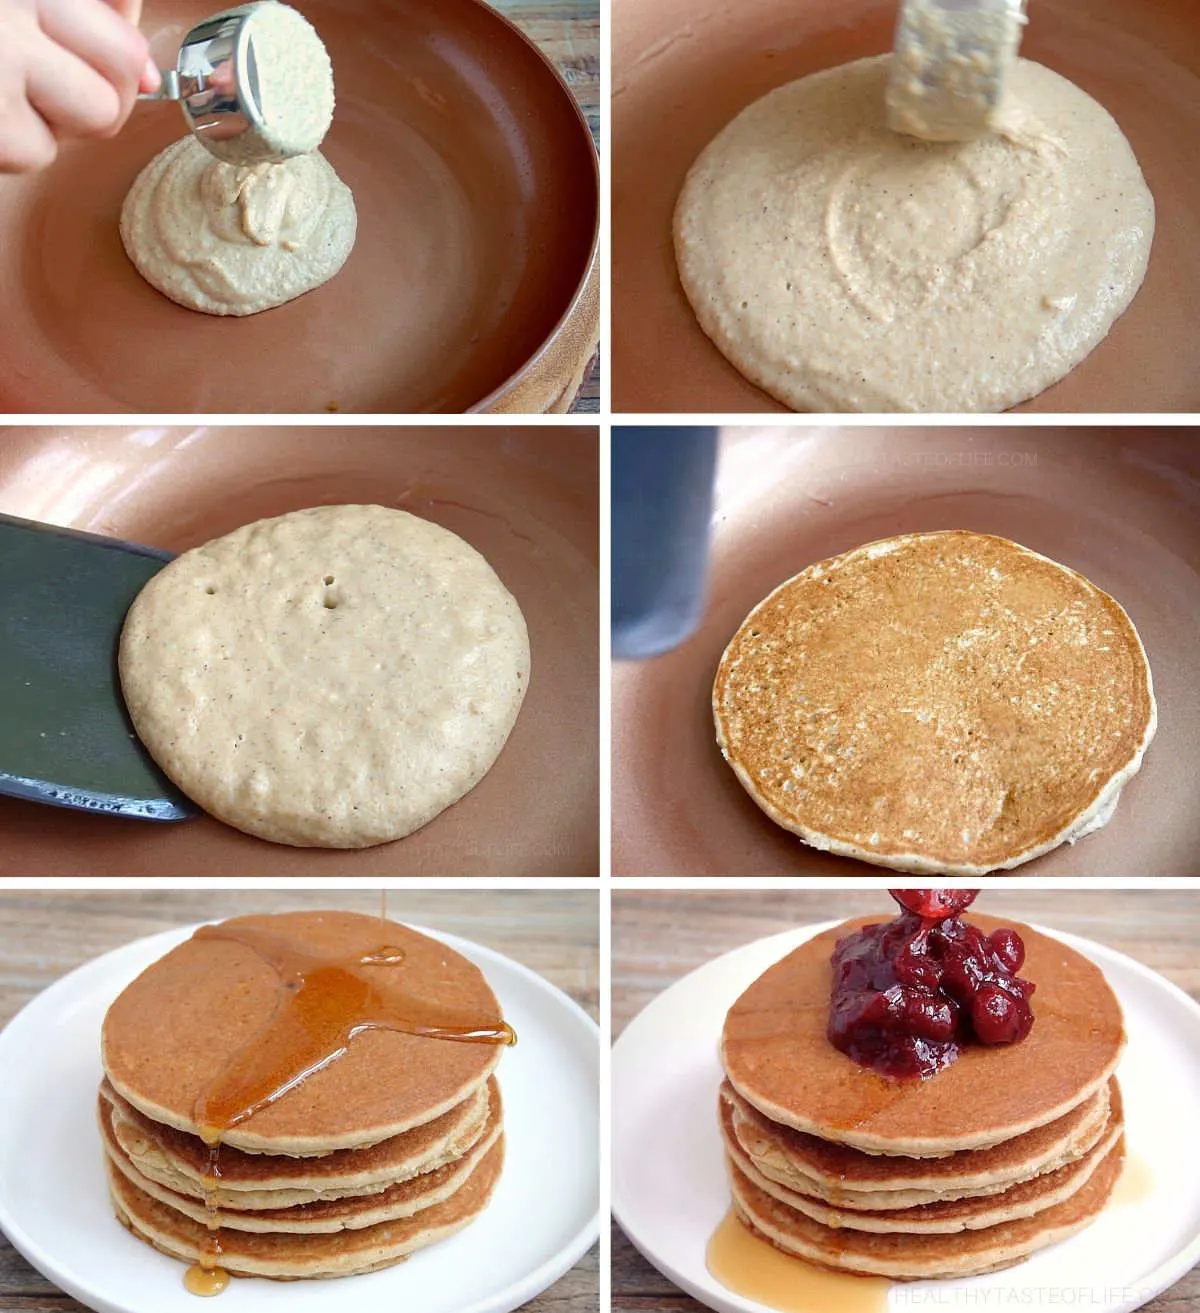 Process shots showing how to cook gluten free sourdough pancakes in a pan.